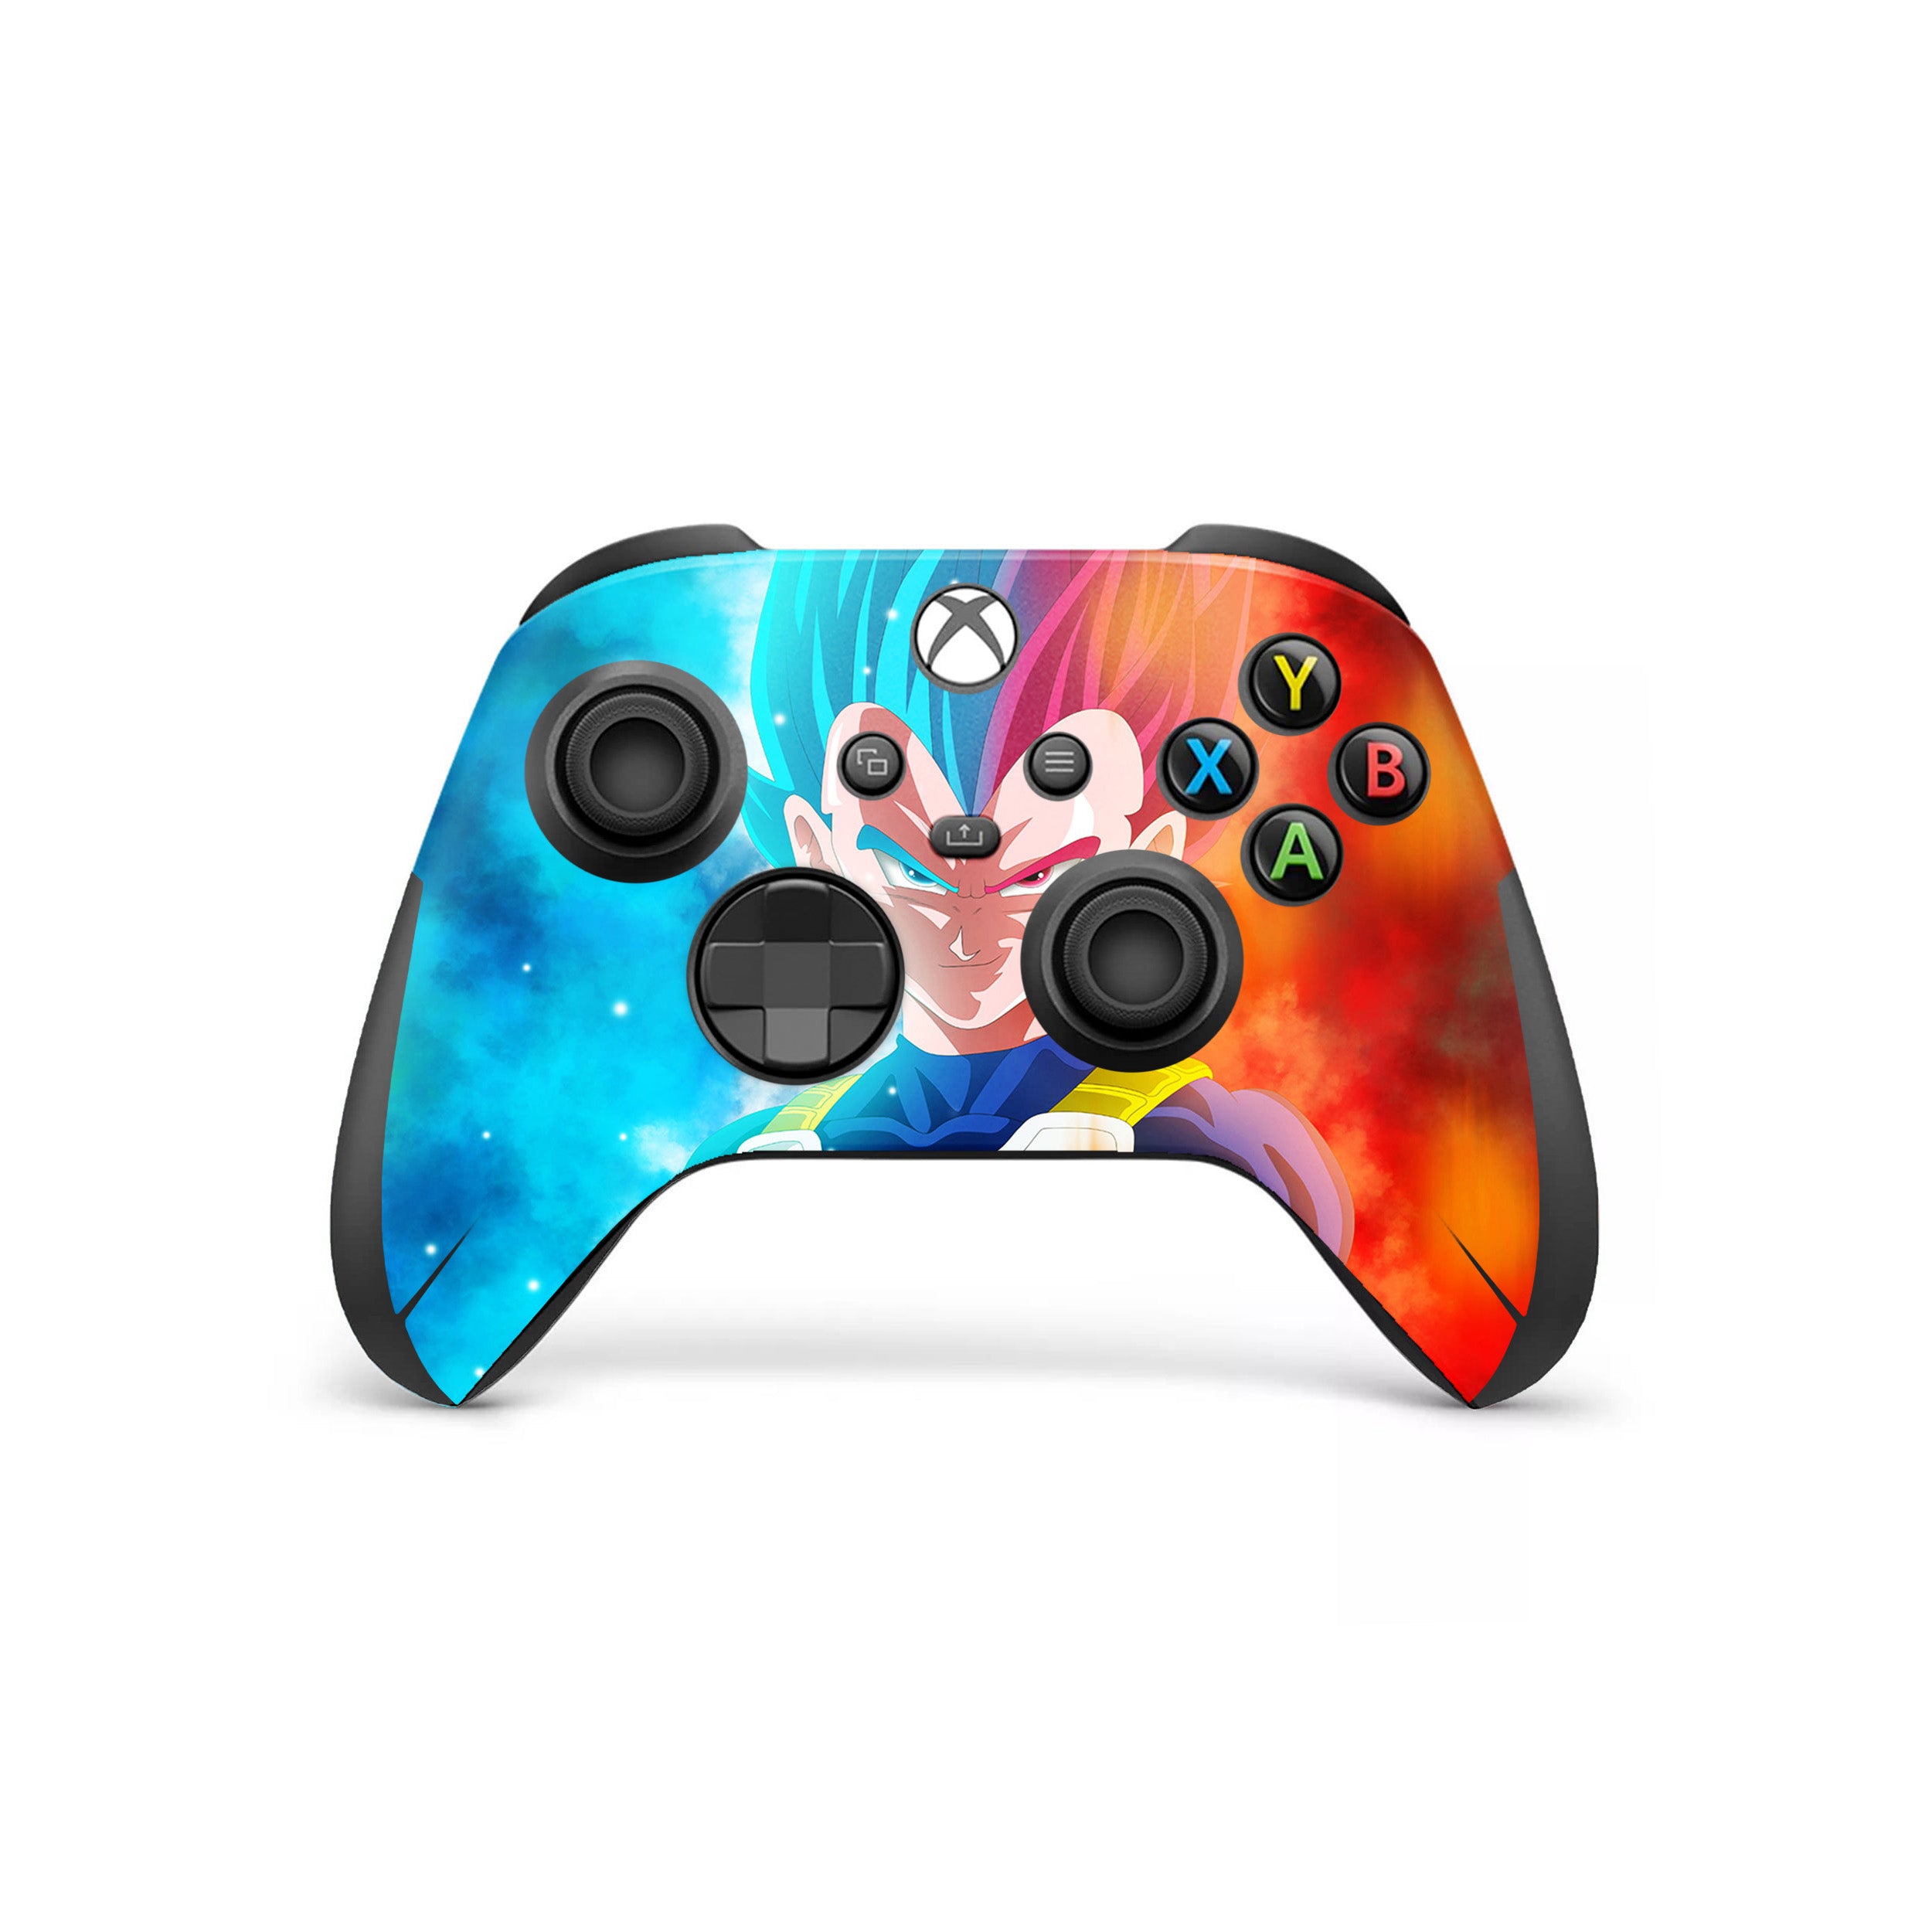 A video game skin featuring a Dragon Ball Super Vegeta design for the Xbox Wireless Controller.